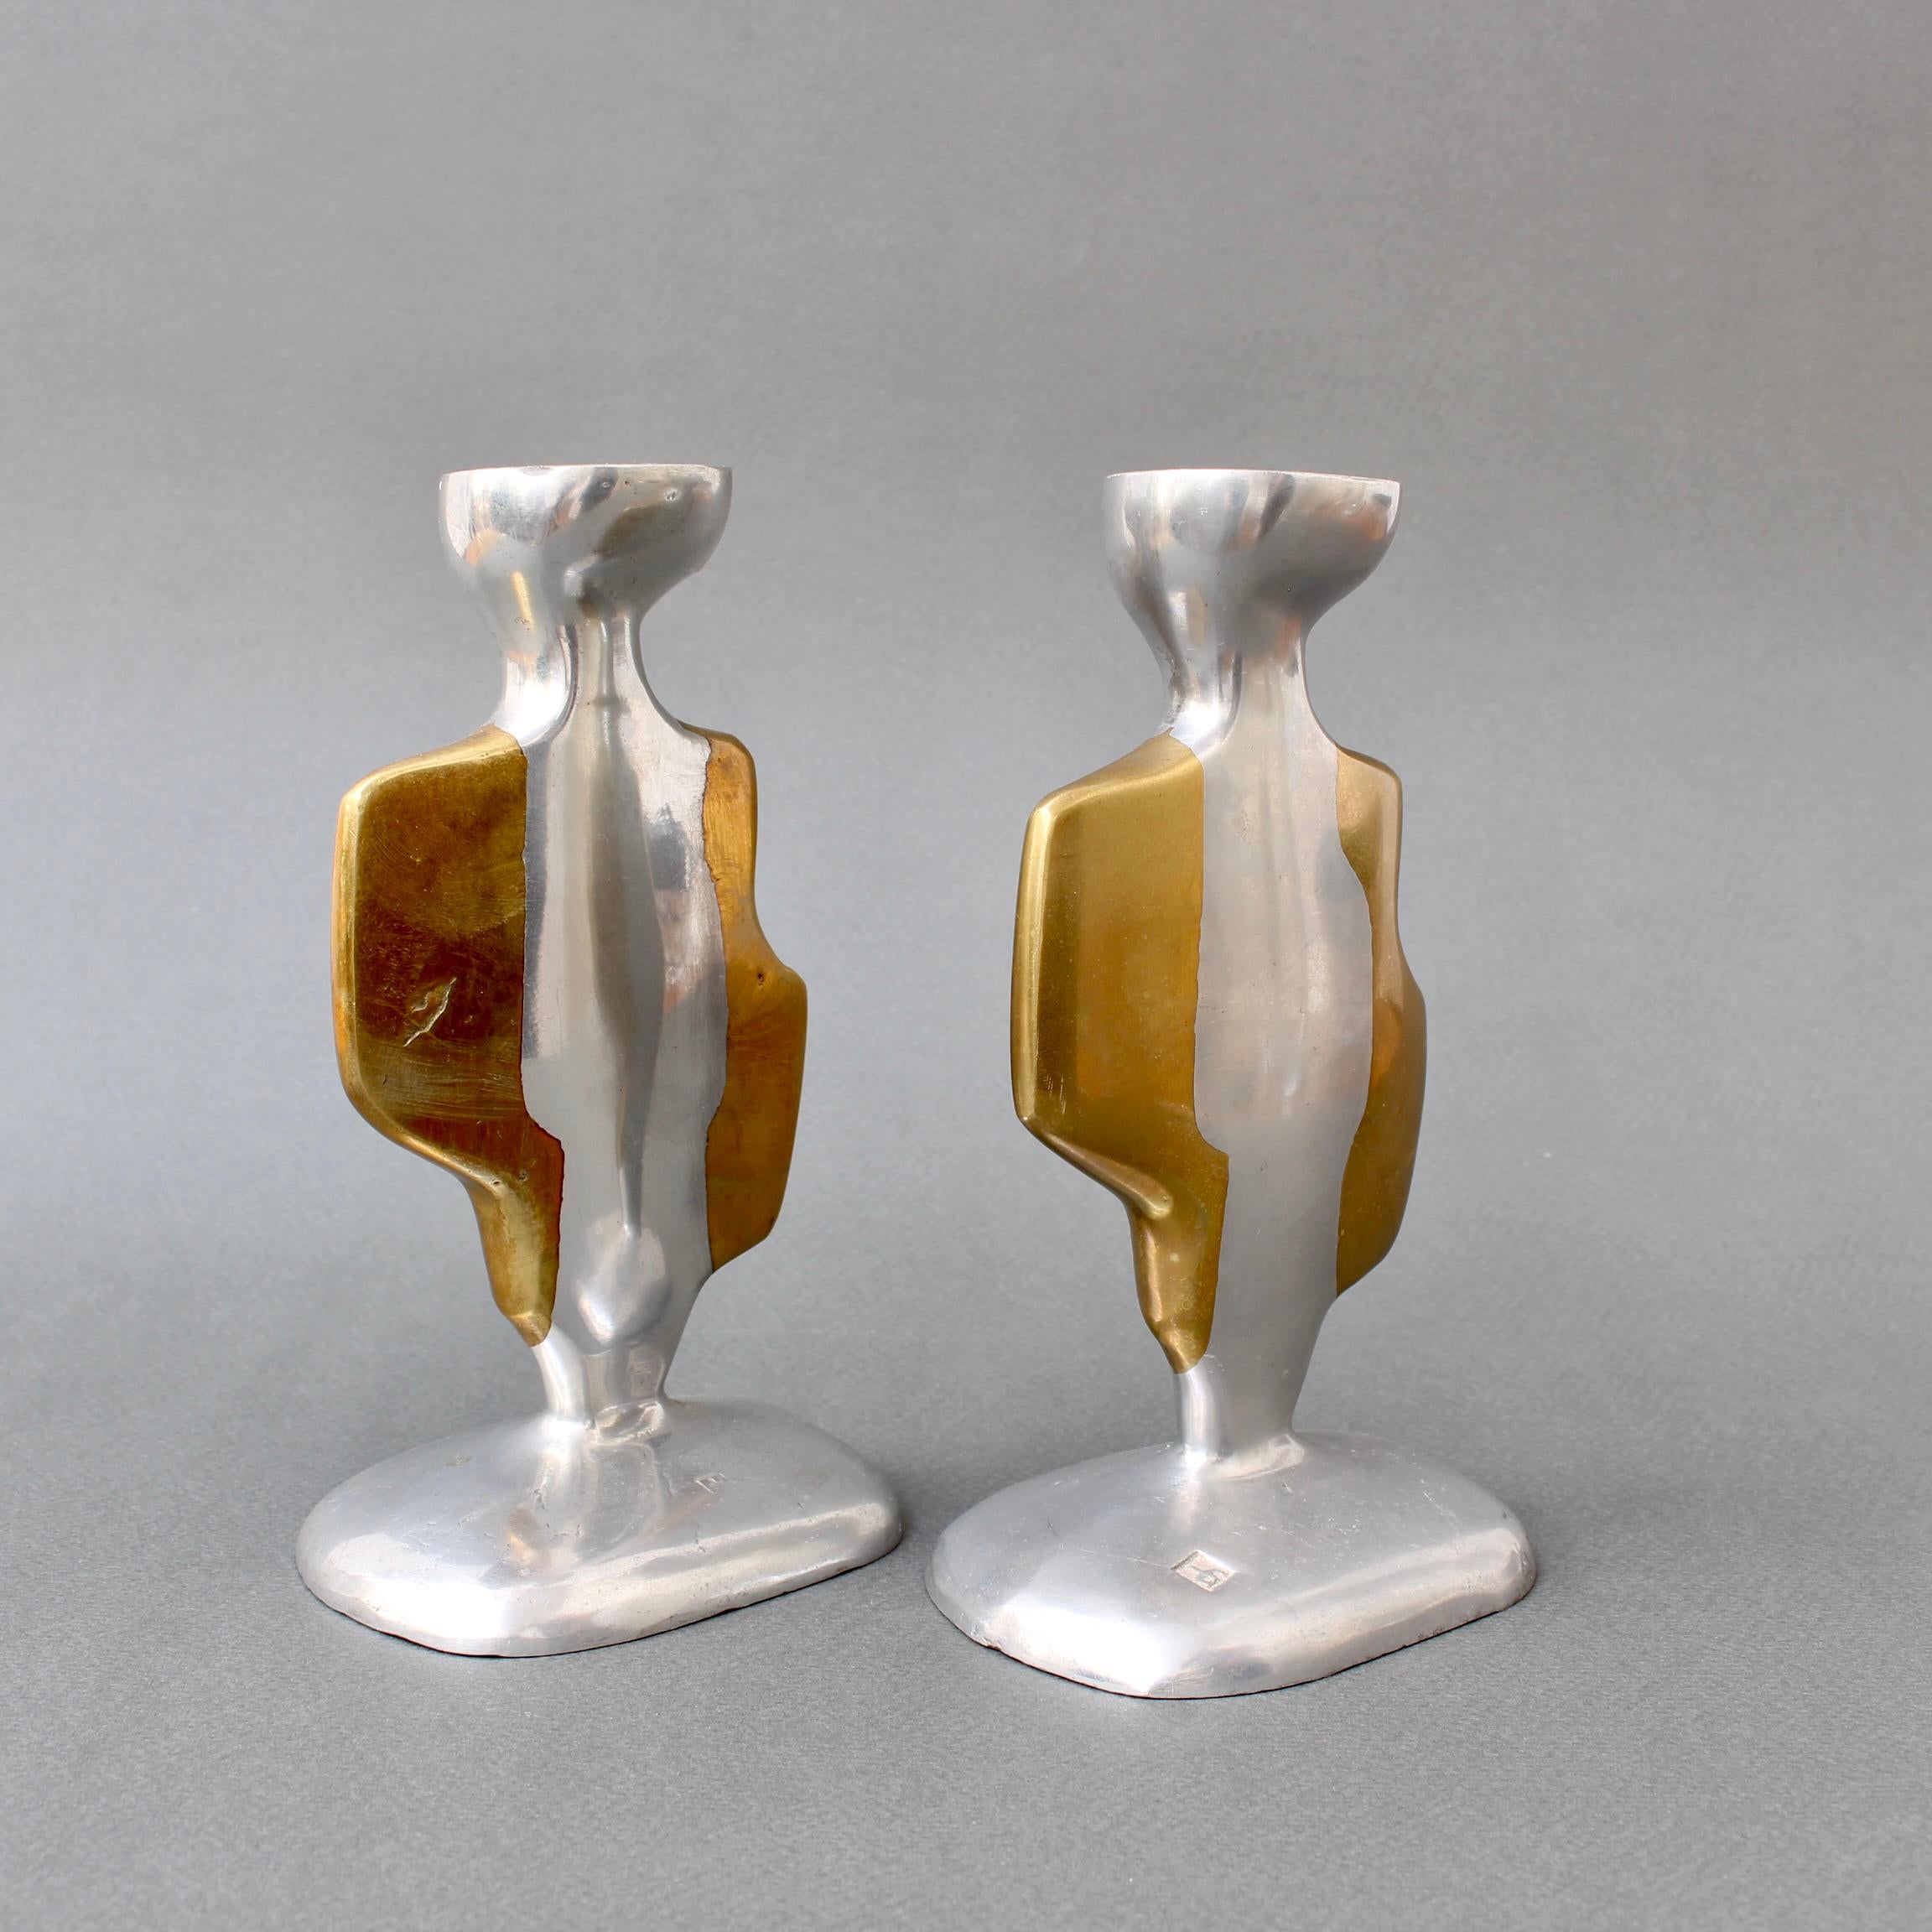 Pair of aluminium and brass candle stands by David Marshall (circa 1980s). Rather assuming human form, these curvy aluminium and brass candle stands have presence, weight and character. So attractive they can stand on their own in the room. Both the